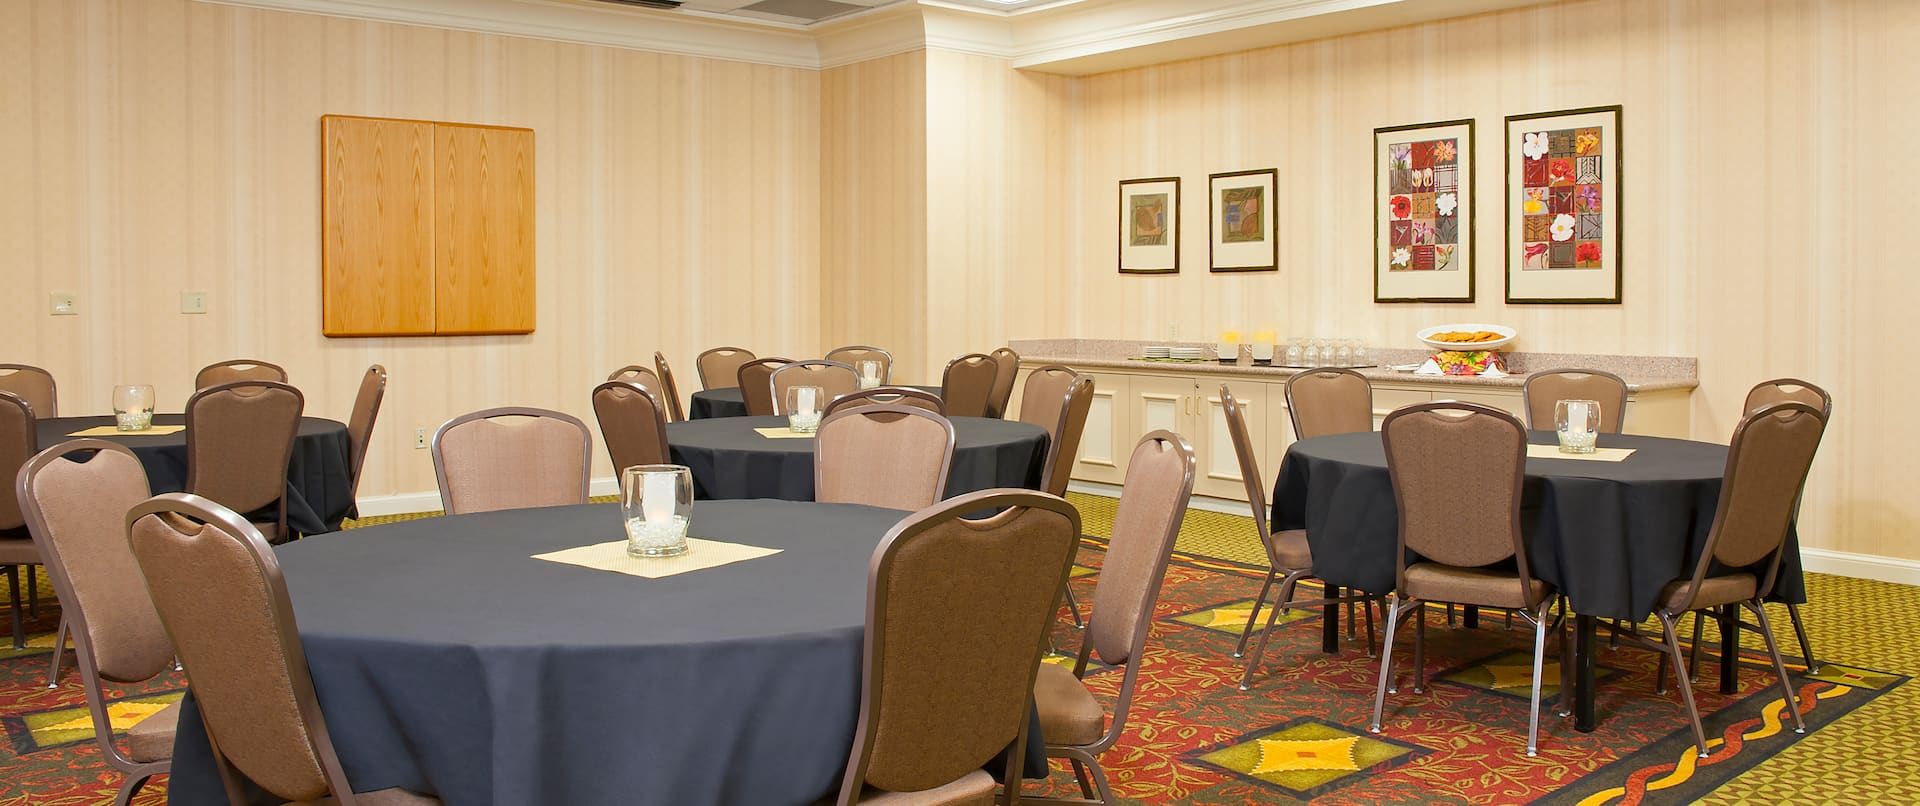 Banquet Set Up With Round Tables, Wall Art, and Refreshment Area in Meeting Space